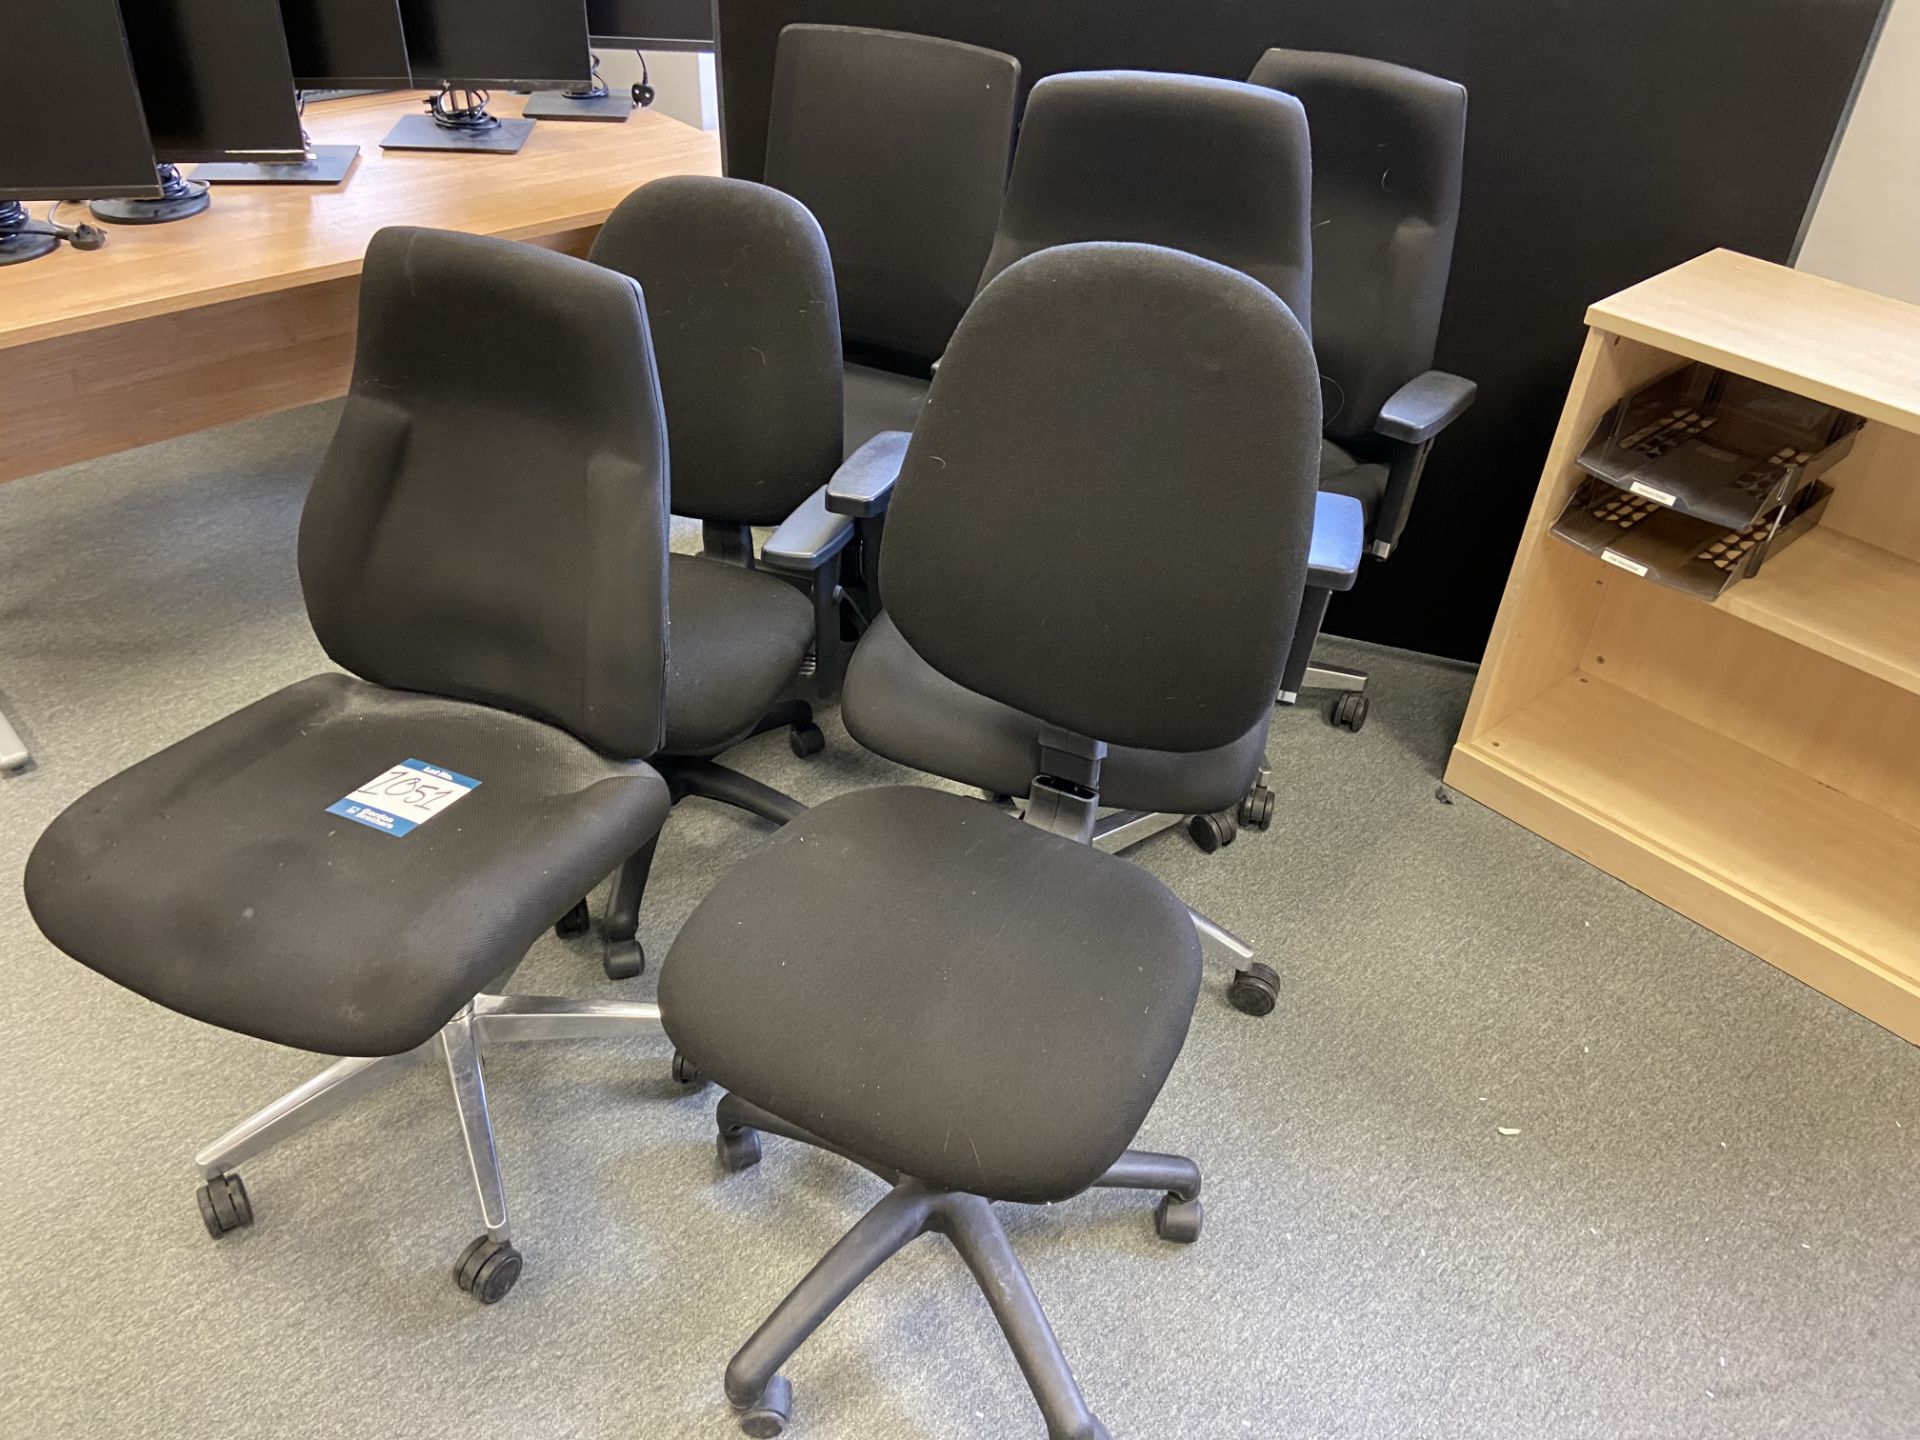 Lot comprisng: six office chairs